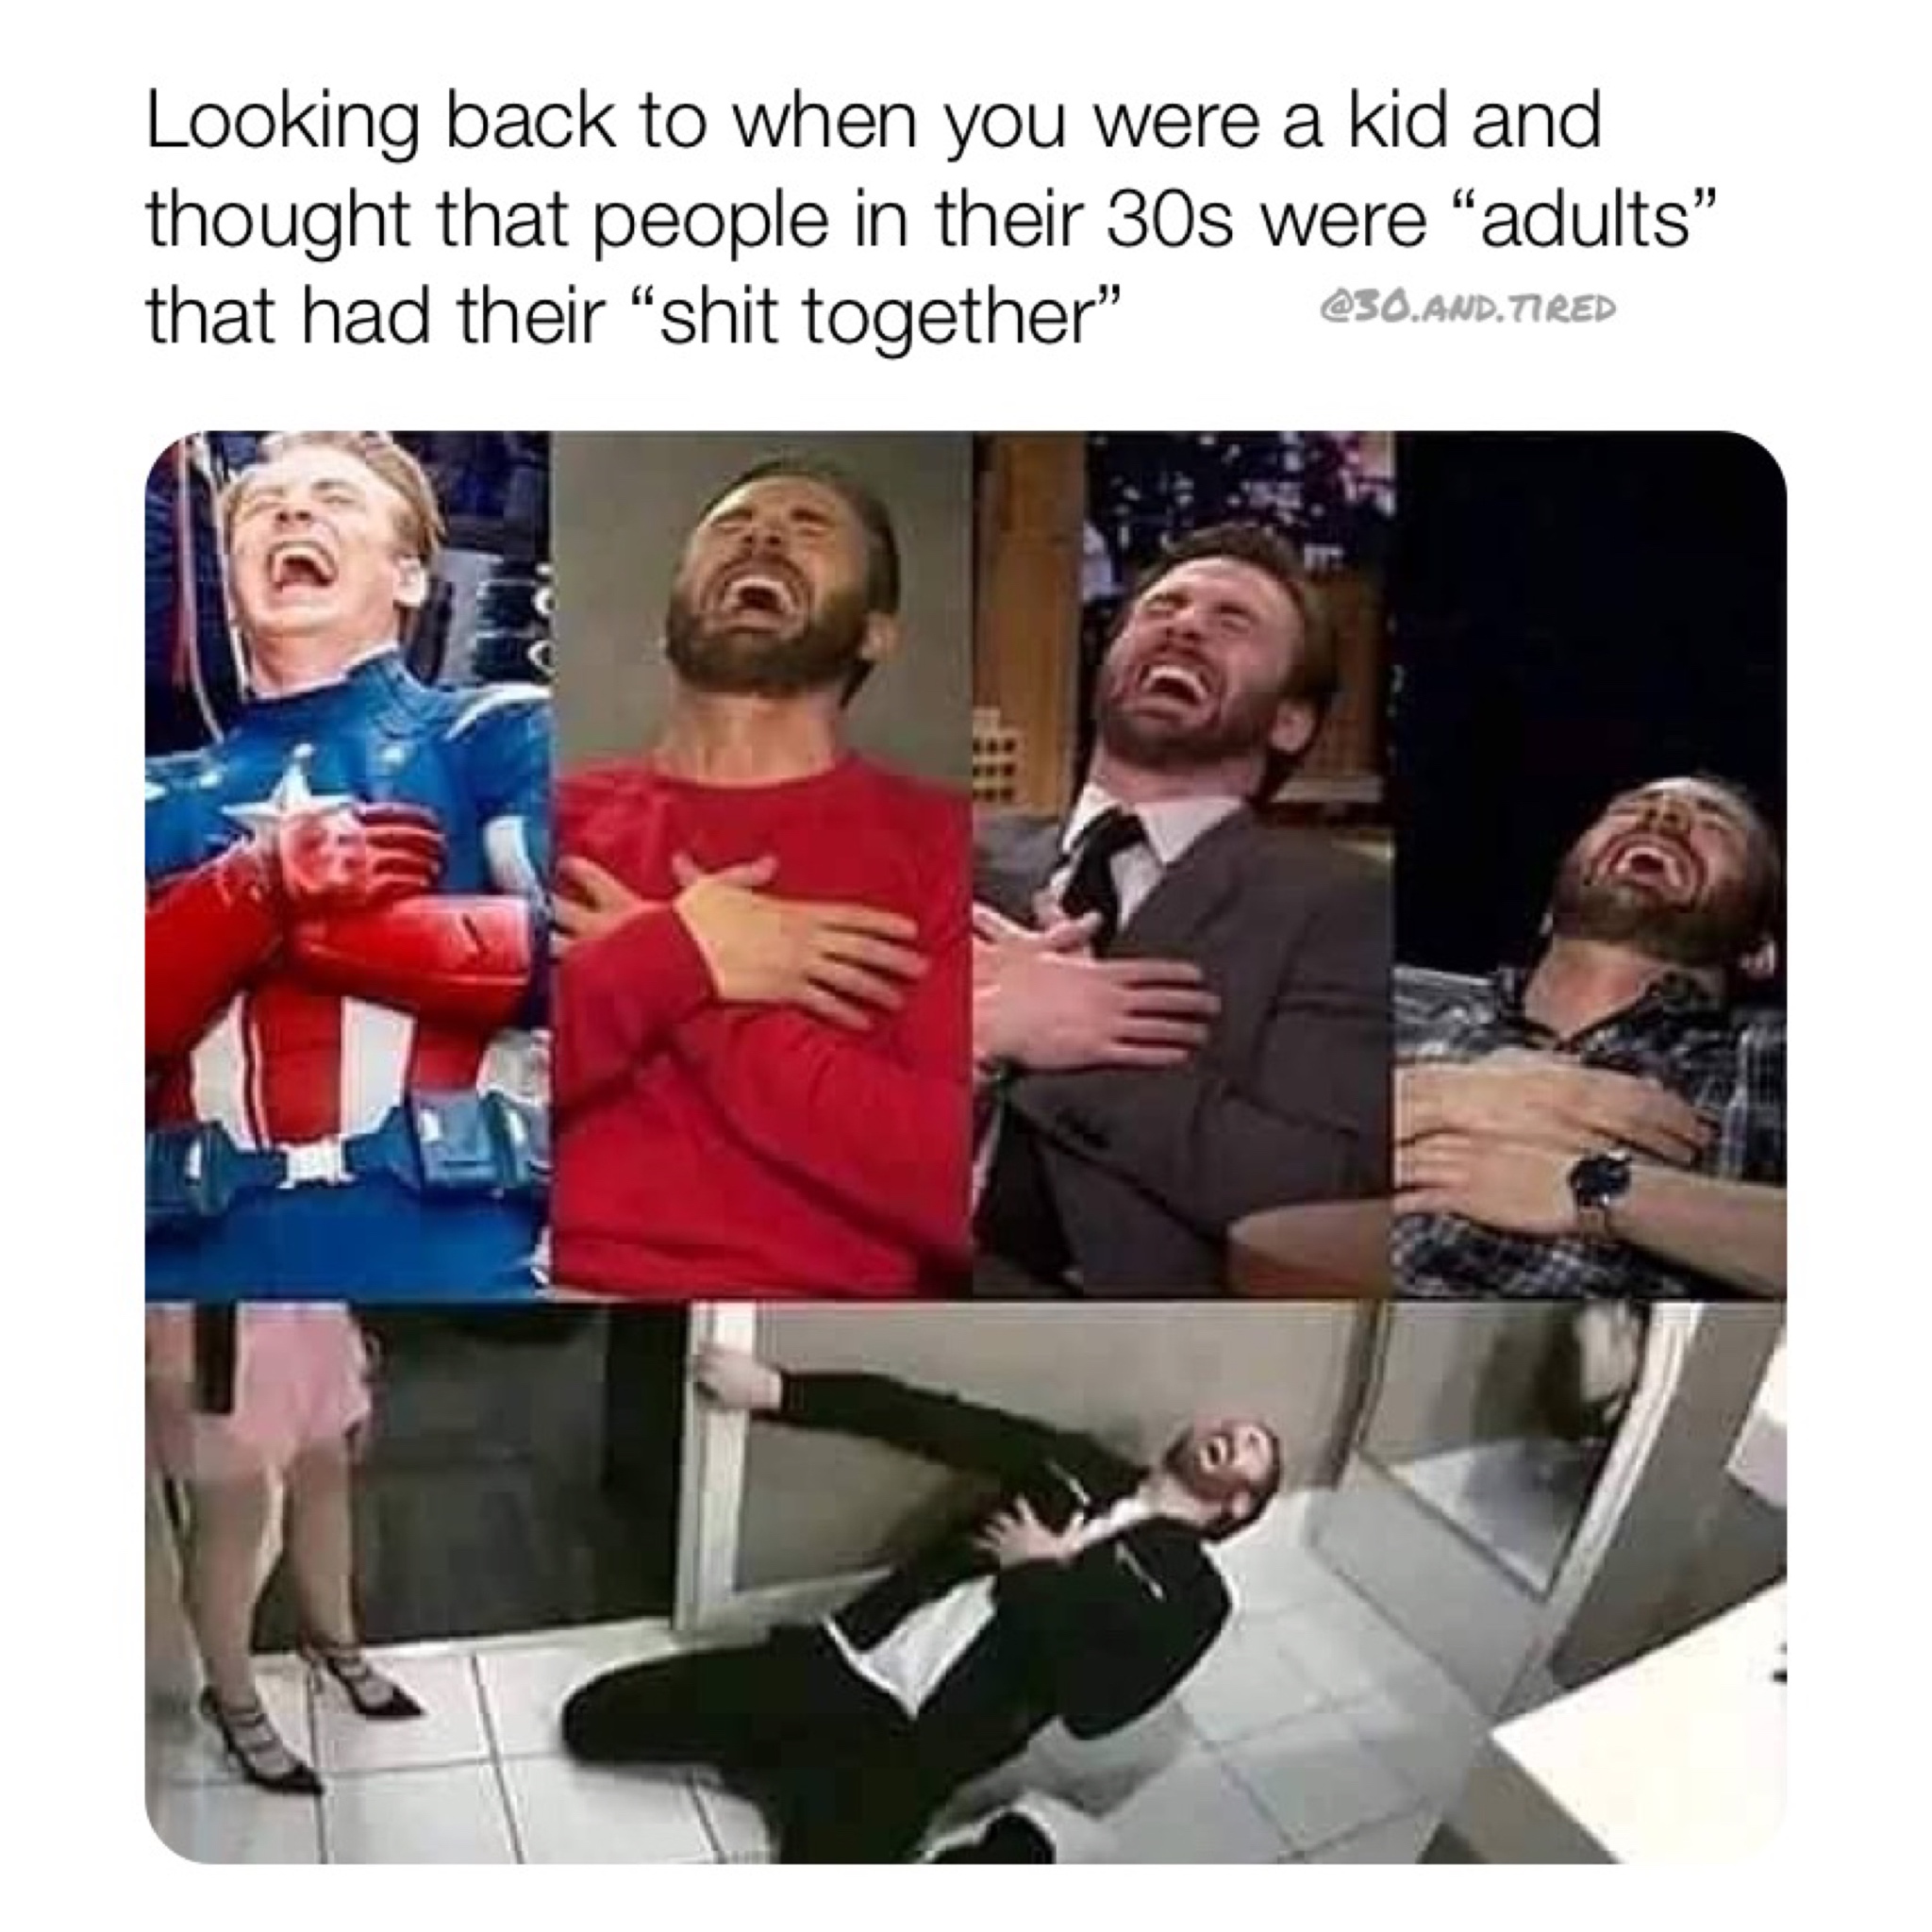 chris evans meme - Looking back to when you were a kid and thought that people in their 30s were "adults" that had their "shit together" .And. Tired